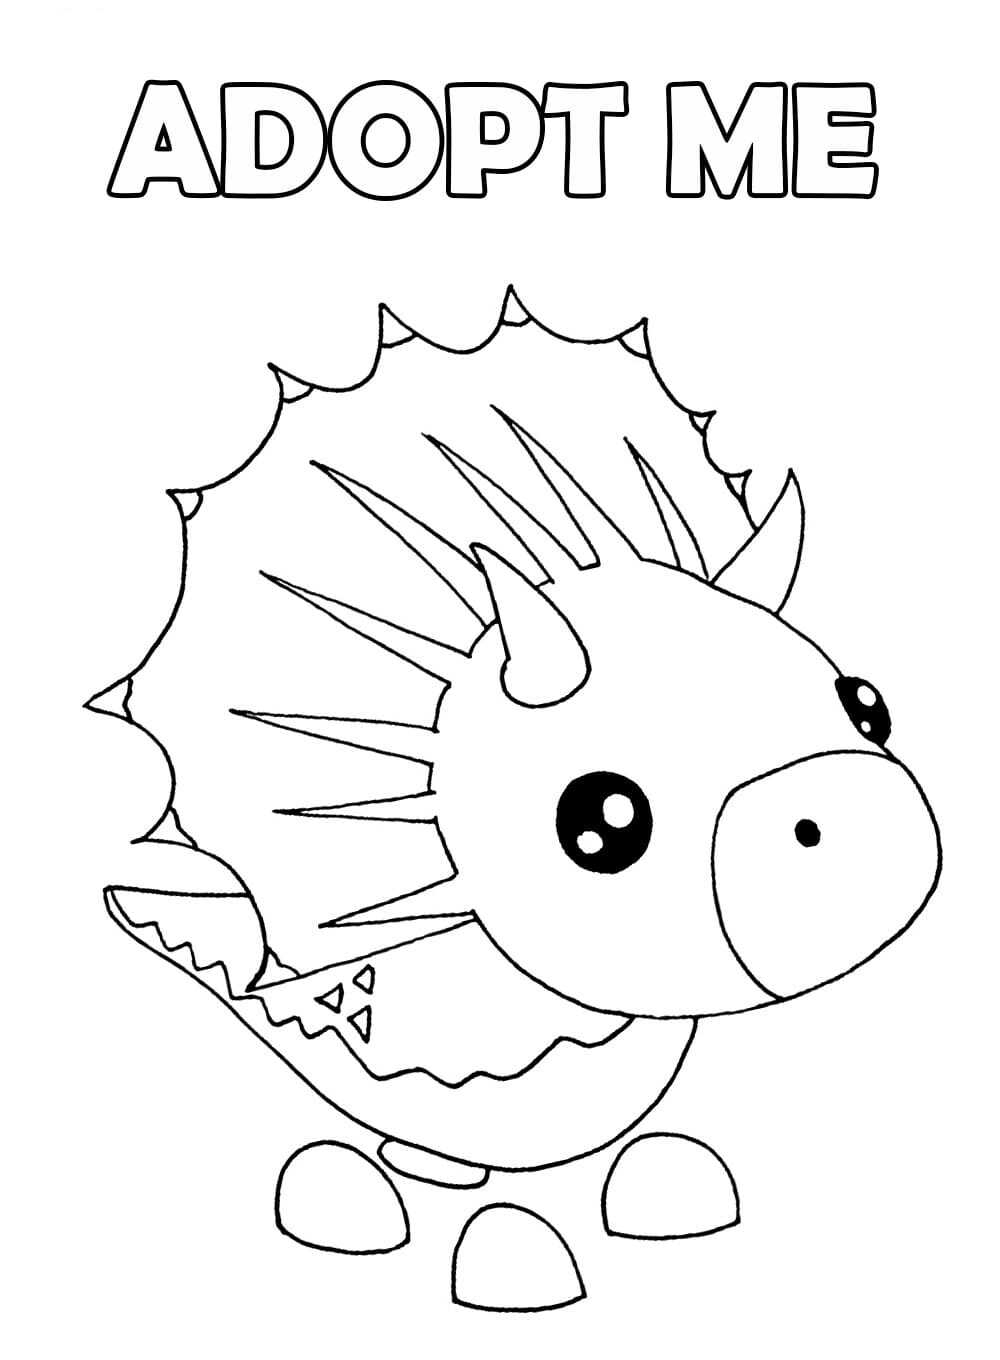 The Triceratops Features Dinosaur Pet With Three White Horns On Its Head And Snout In Adopt Me Video Games Coloring Pages Adopt Me Coloring Pages Coloring Pages For Kids And Adults - black and white horns roblox